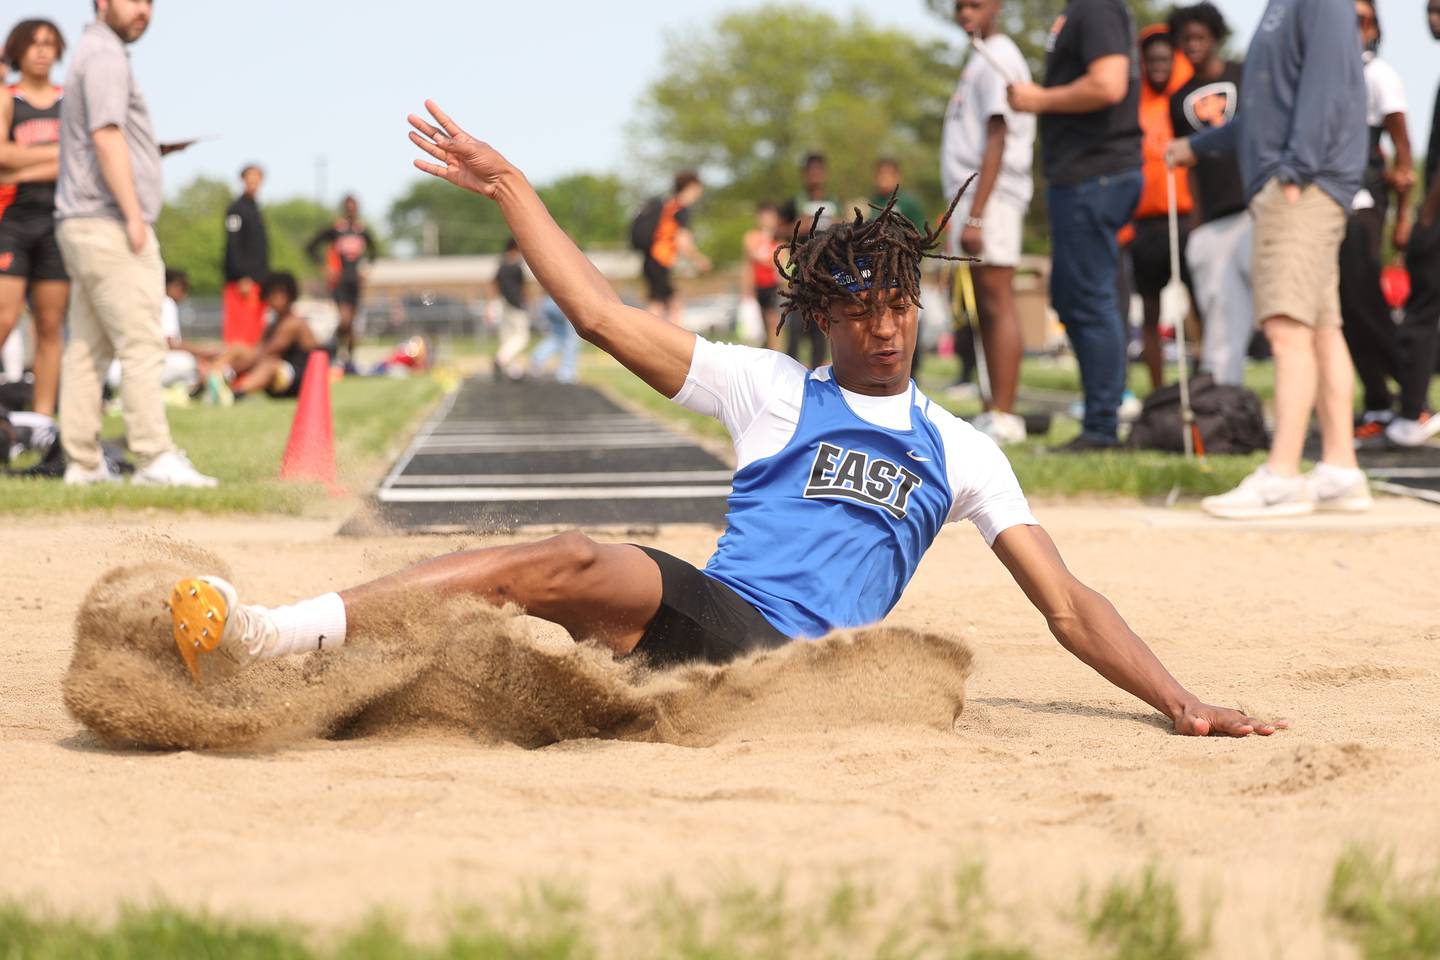 Lincoln-Way East’s Dedrick Richardson Jr competes in the Long Jump at the Class 3A Minooka Boys Track and Field Sectional on Wednesday, May 17, 2023 in Minooka. Dedrick finish first to move on to the State Finals.